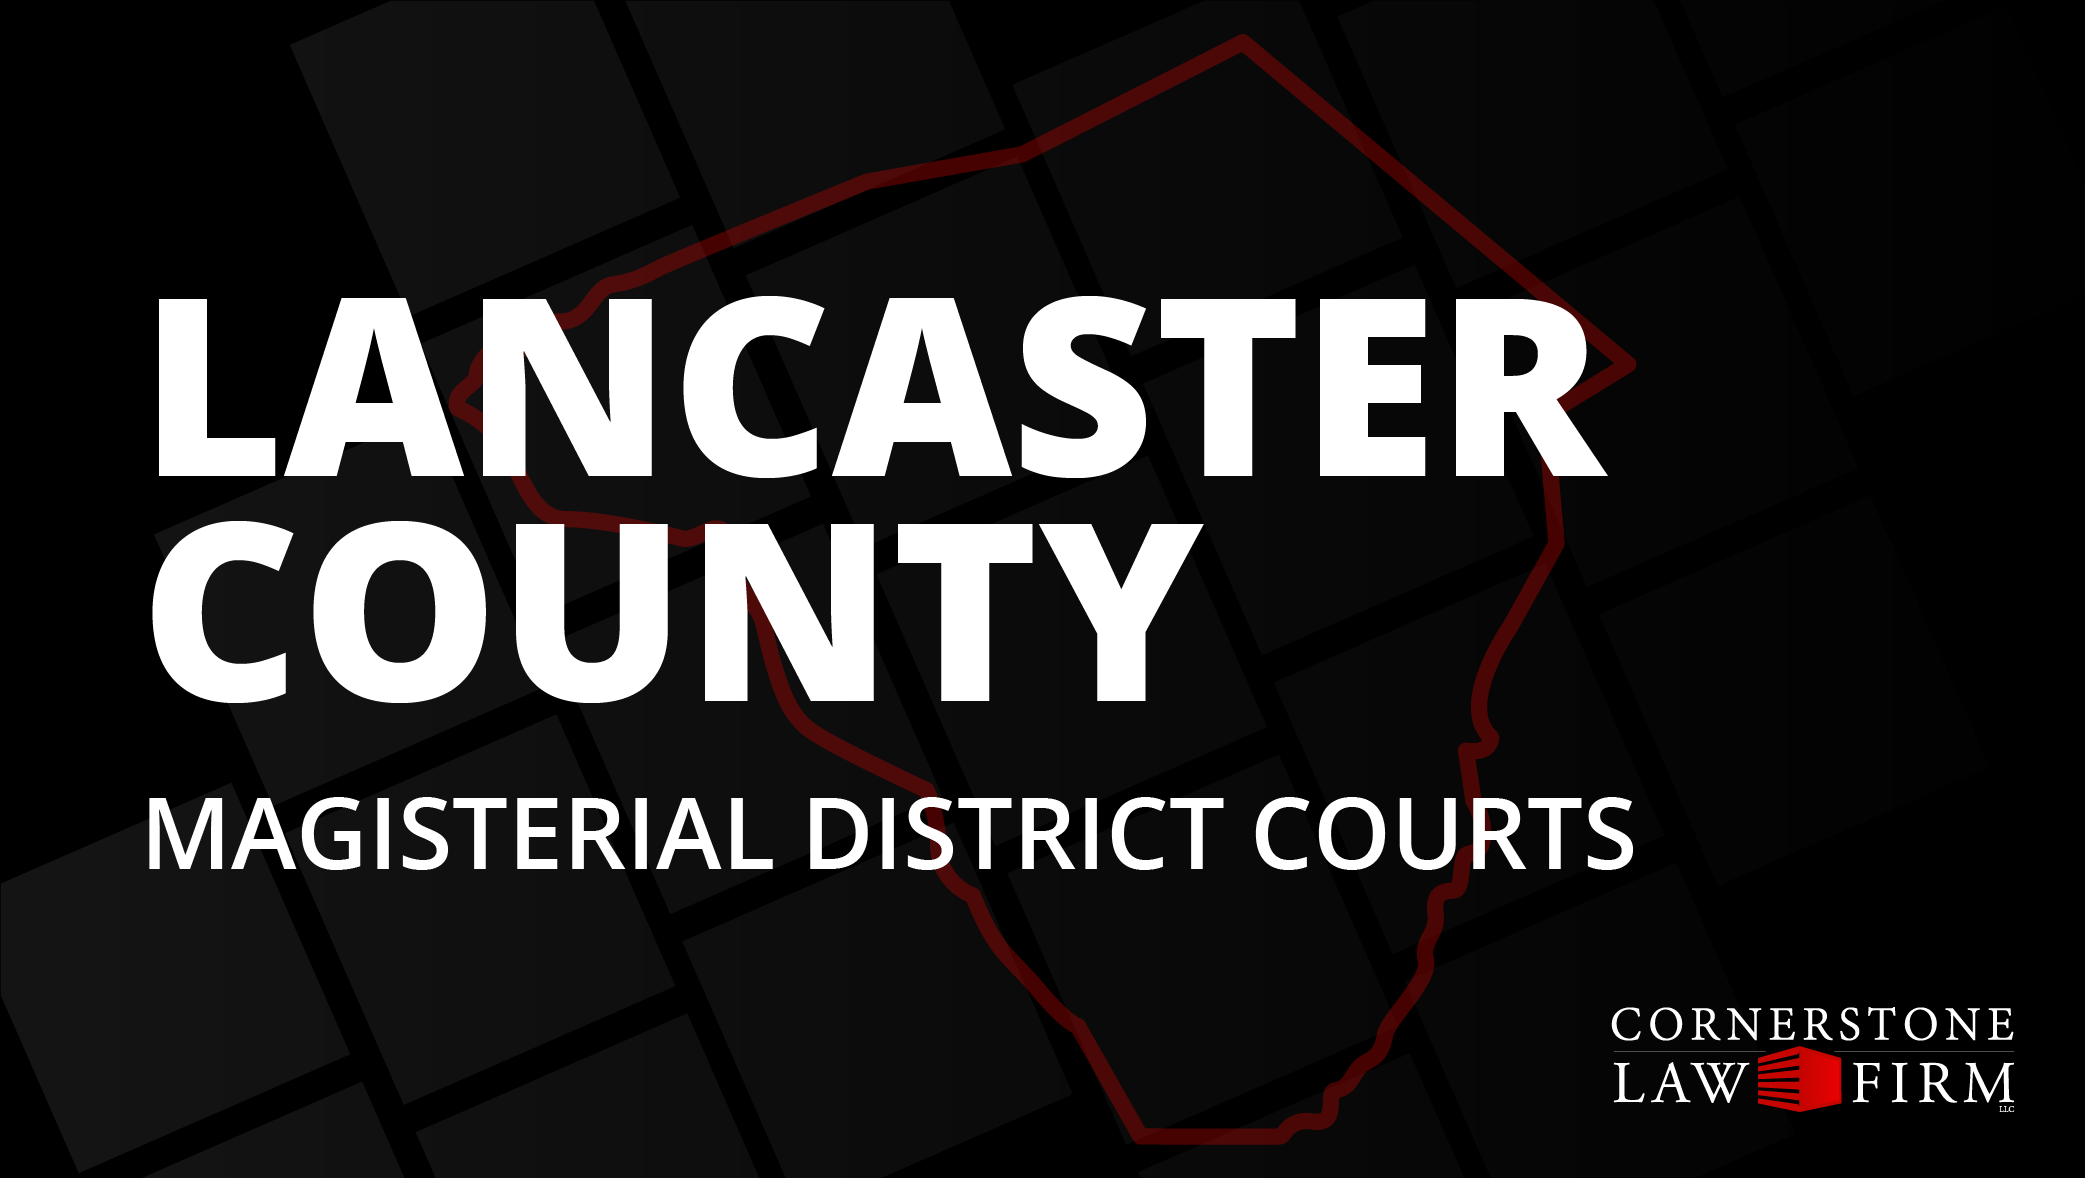 The words "Lancaster County Magisterial District Courts" over a black background with a faded red outline of the county.